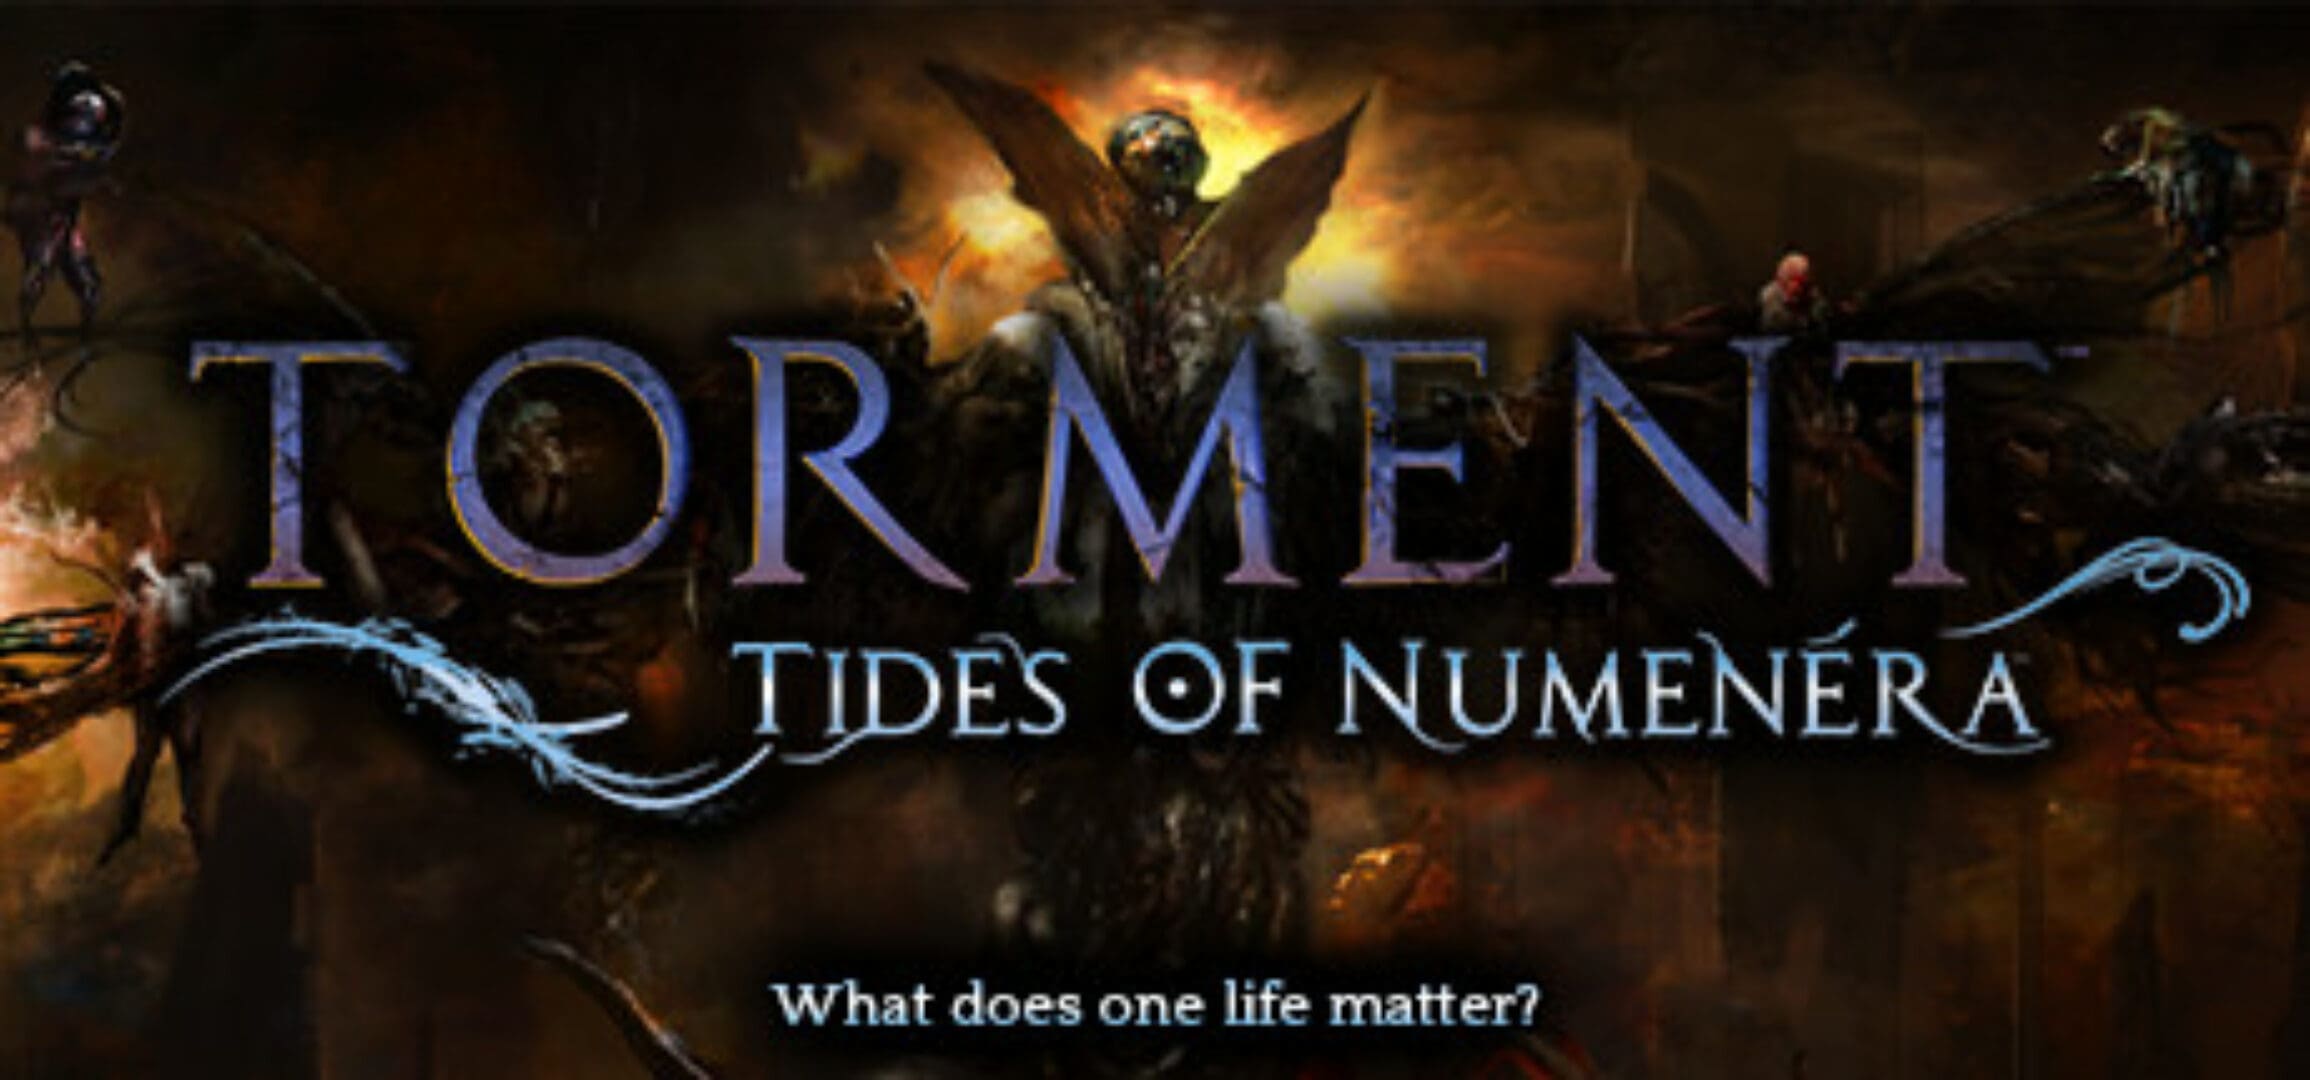 Torment: Tides of Numenera Release Date Revealed